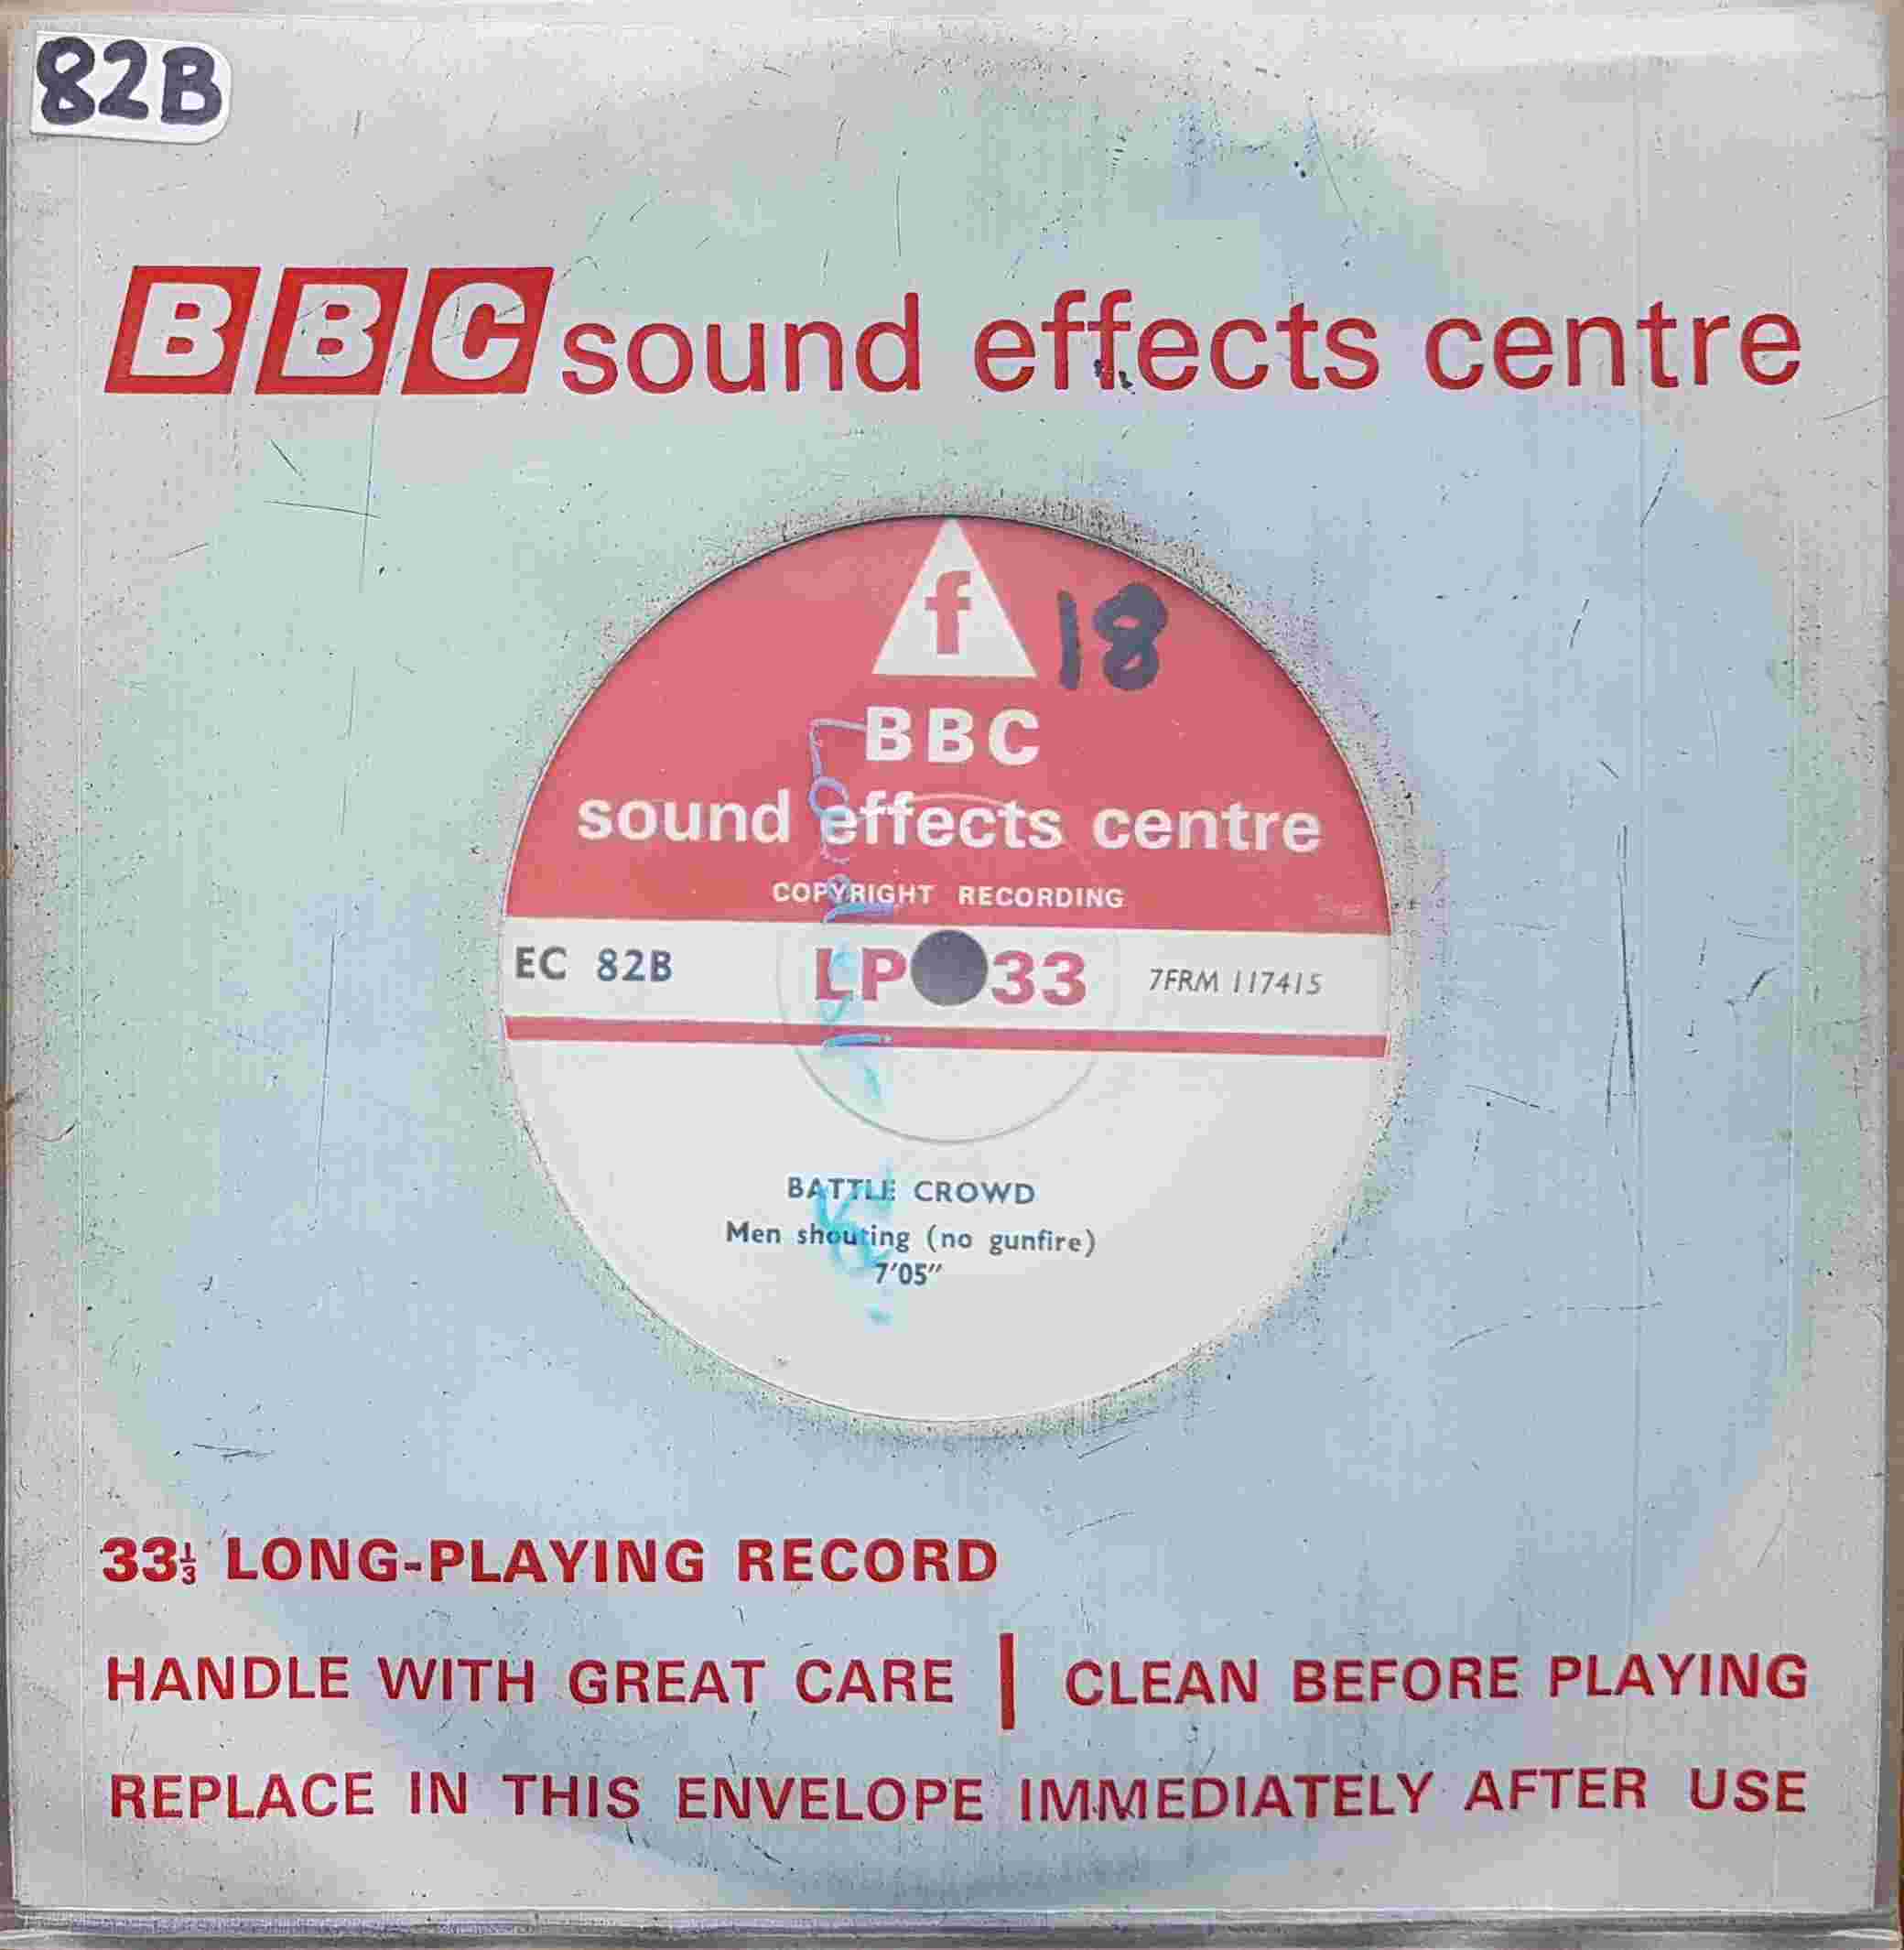 Picture of EC 82B Battle ground by artist Not registered from the BBC singles - Records and Tapes library